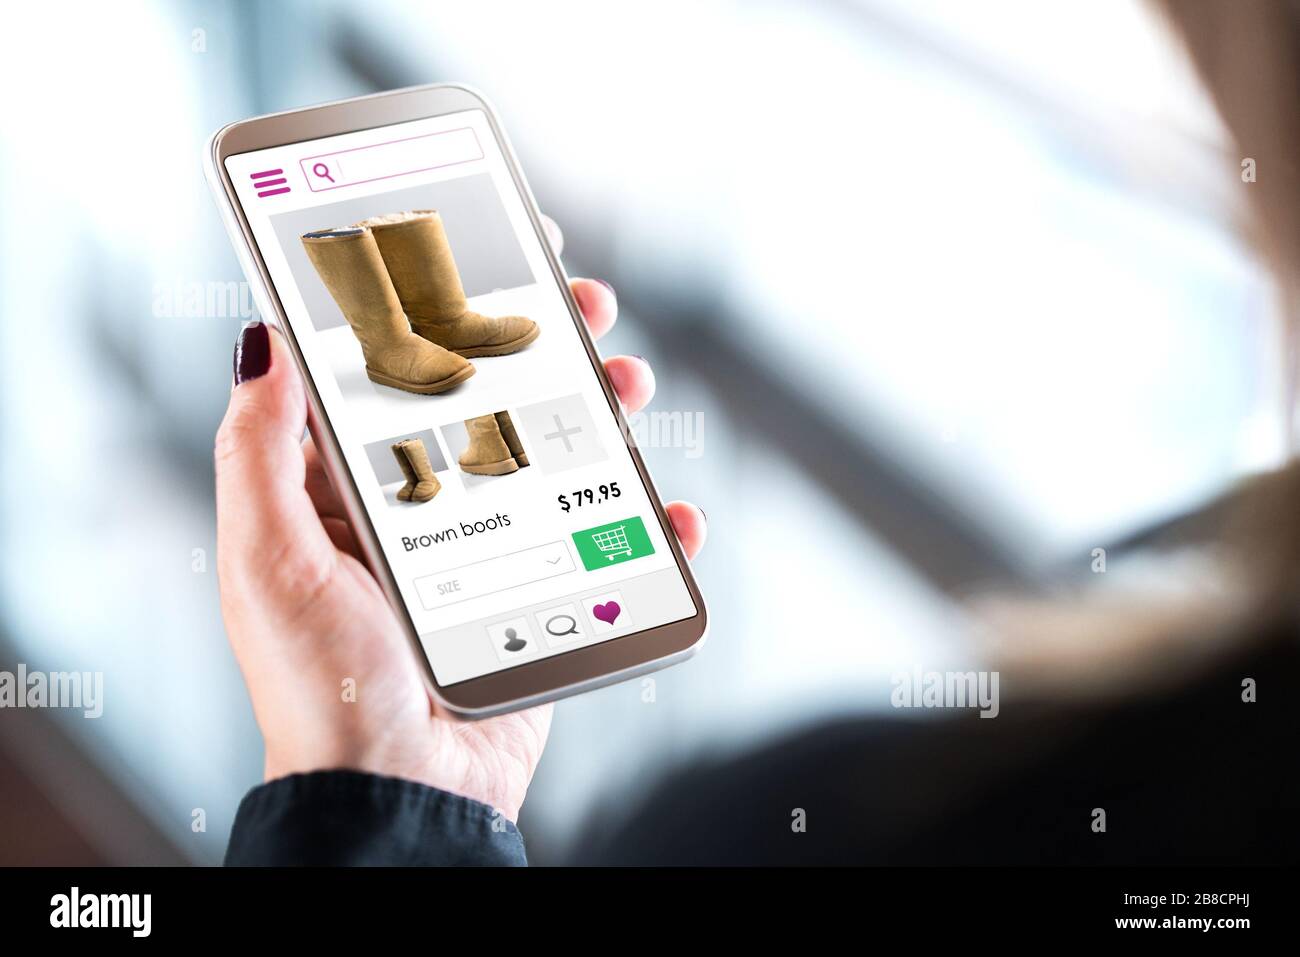 Female customer shopping in online fashion store with mobile phone. Woman buying shoes or boots with smartphone. Internet sale on website in cellphone. Stock Photo